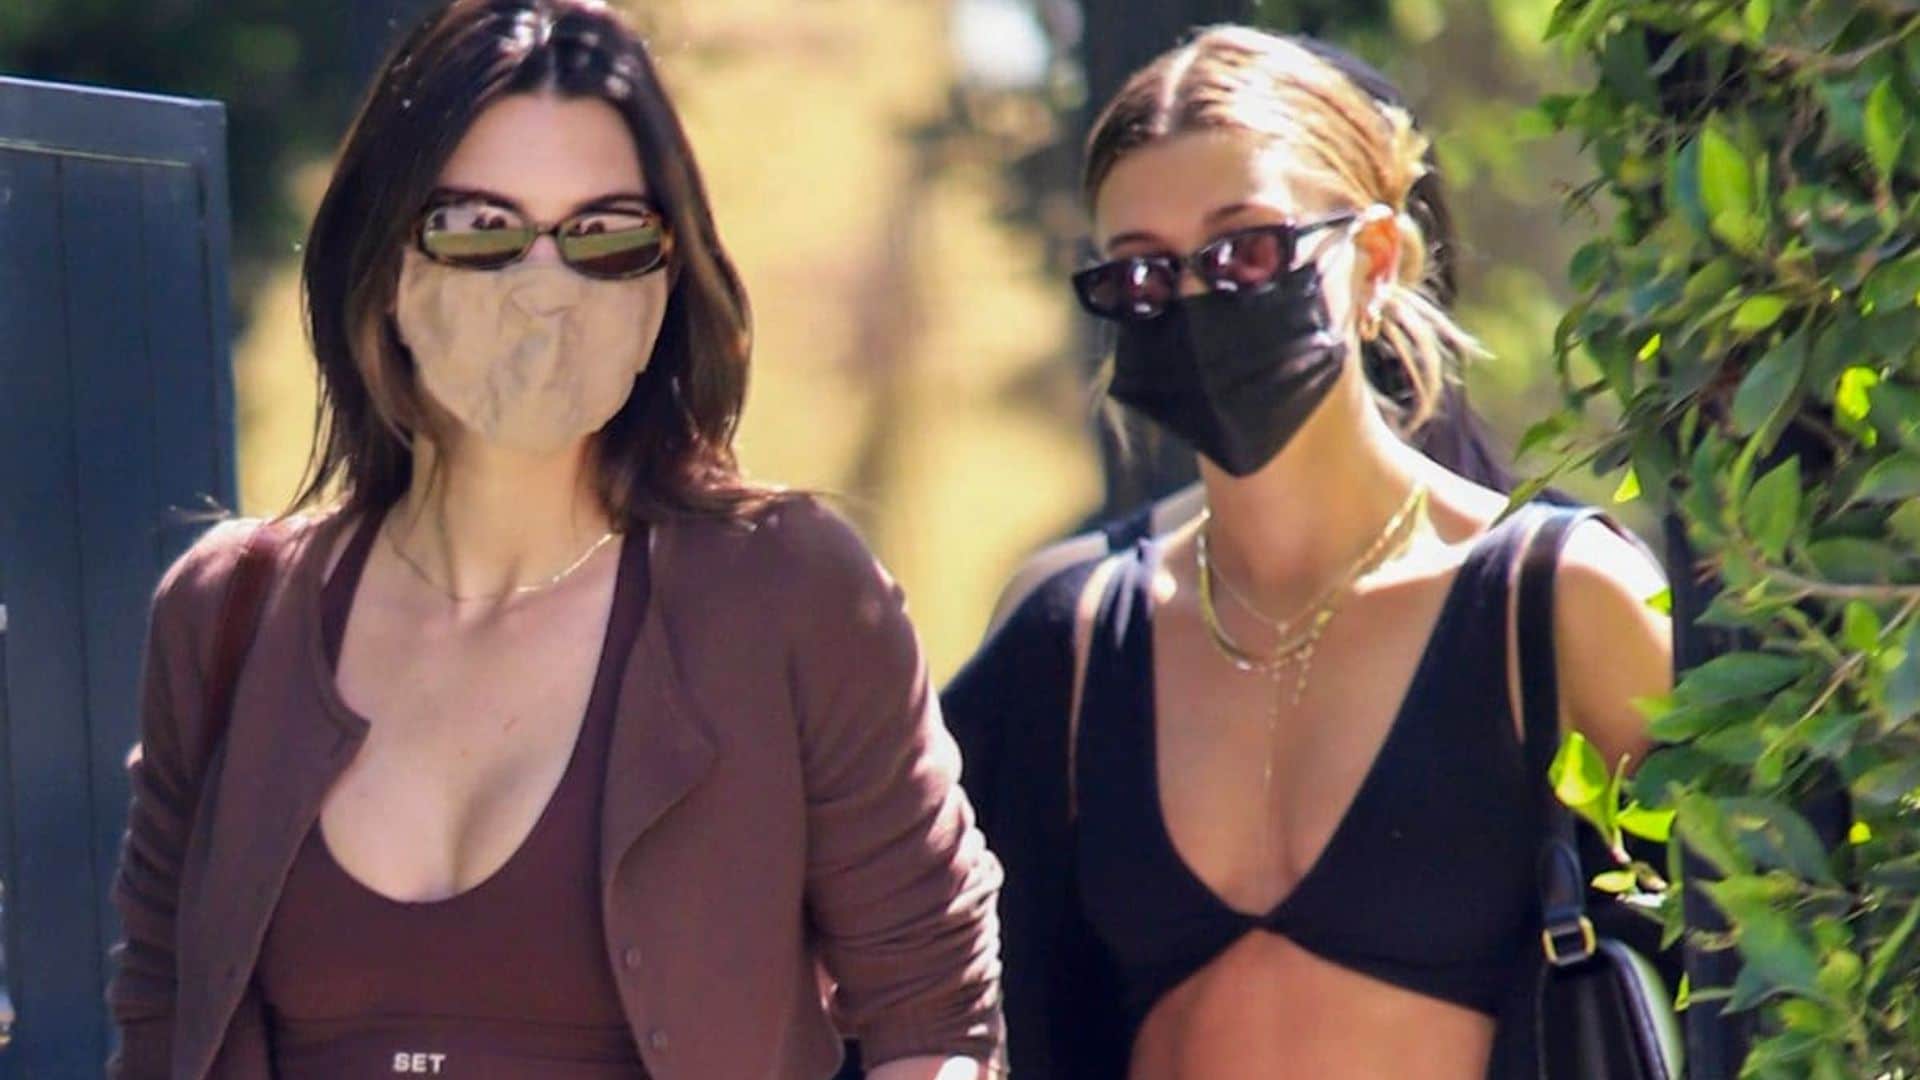 Kendall Jenner and Hailey Bieber meet up to do pilates: pics